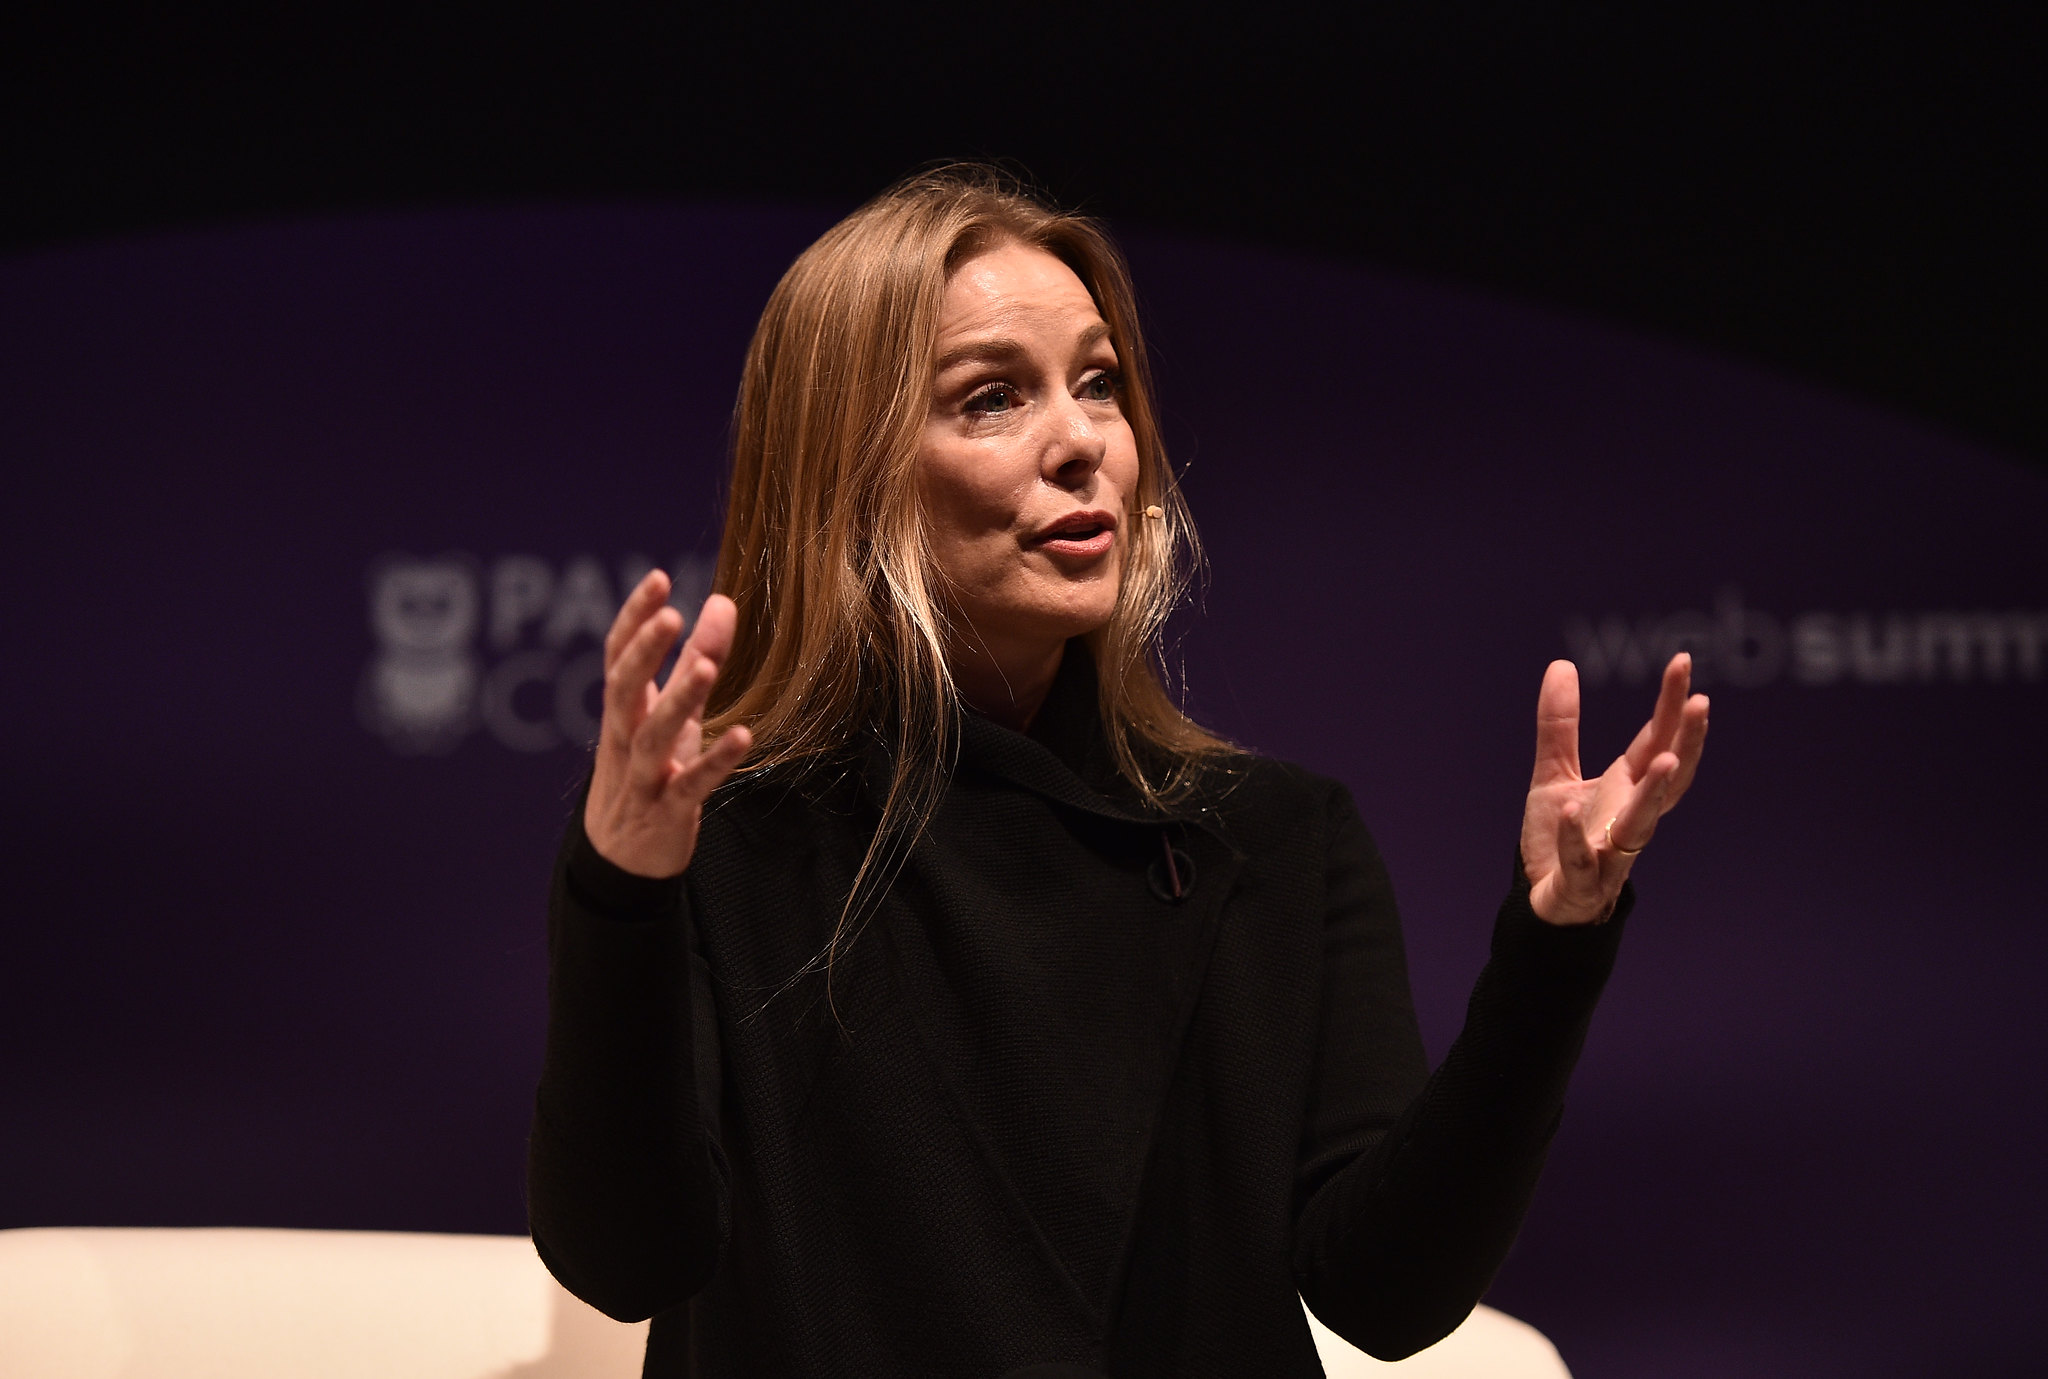 Photograph of a person (Sairah Ashman, global CEO of Wolff Olins) speaking on stage at Web Summit. They are gesturing with their hands and appear to be speaking to an audience.